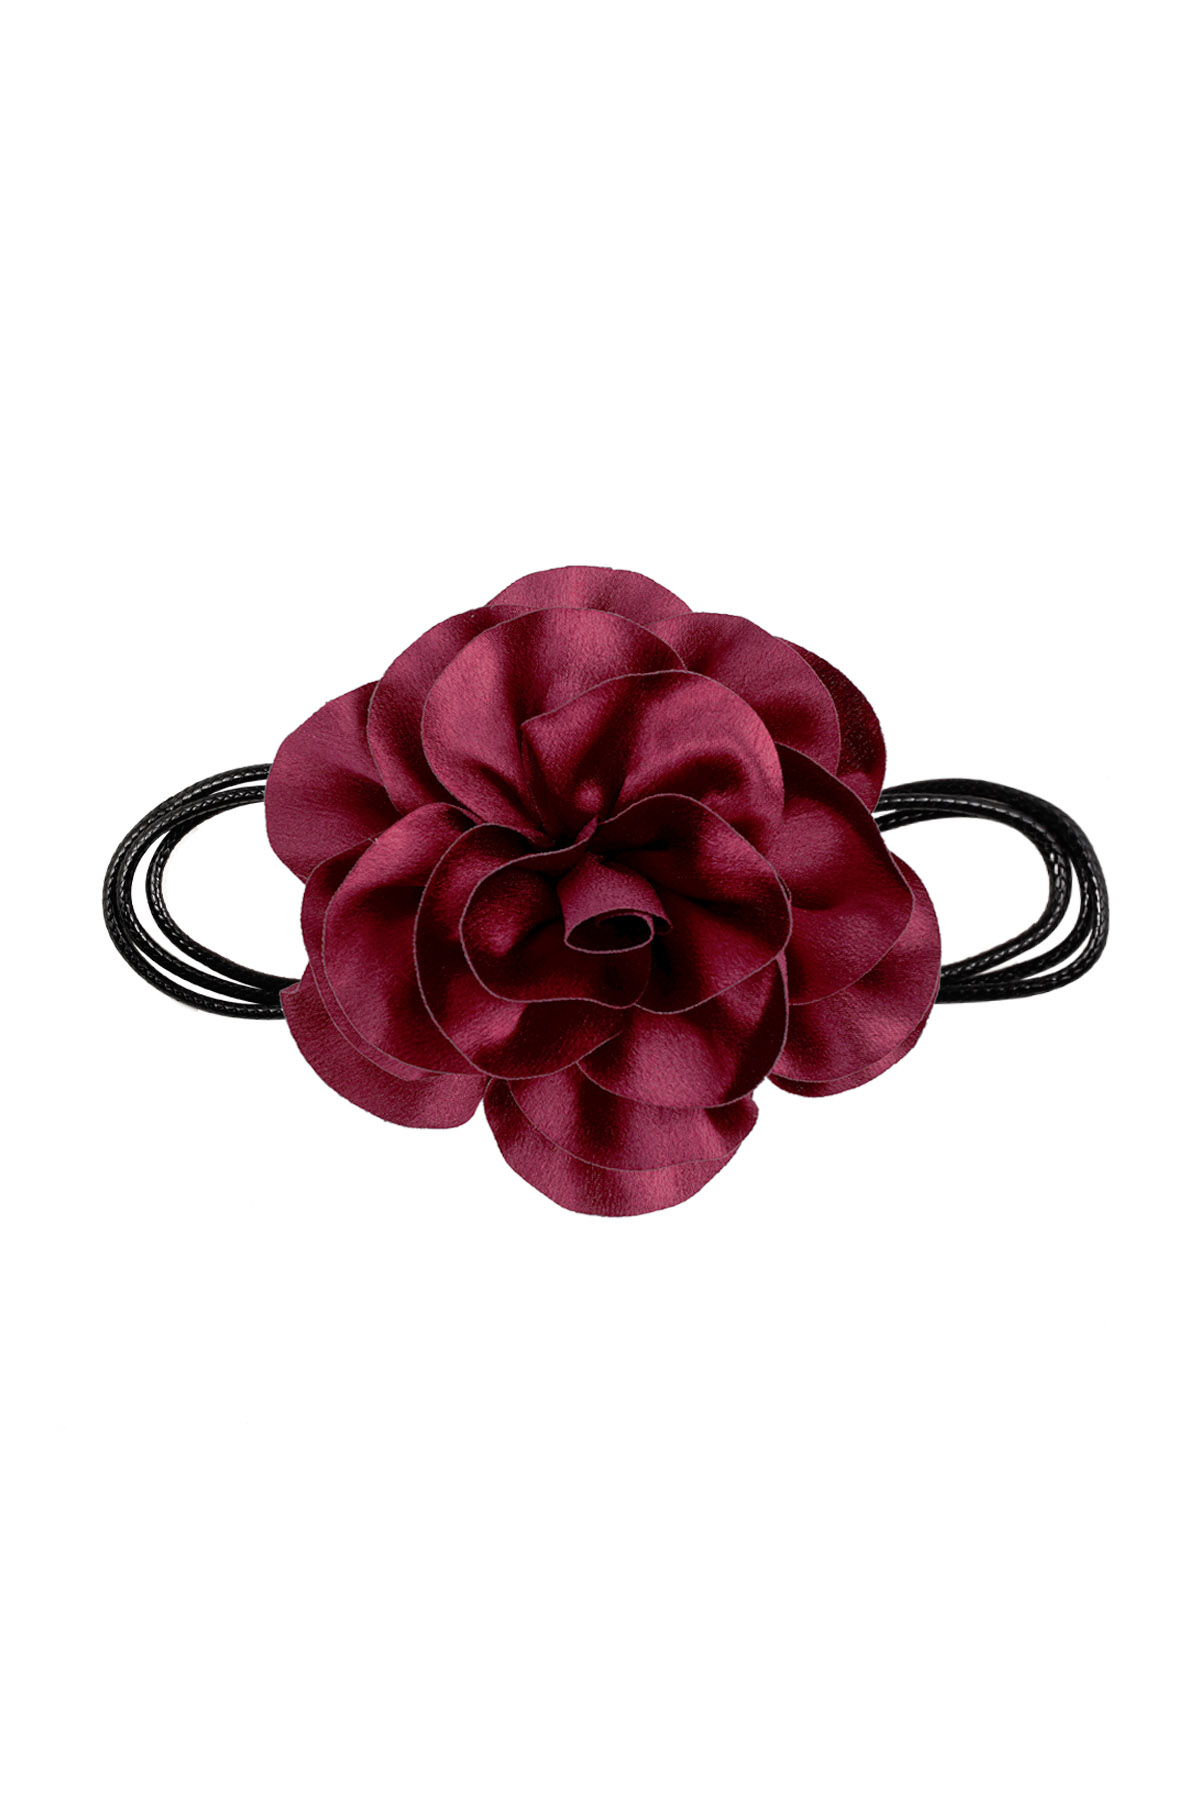 Necklace rope shiny flower - dark red